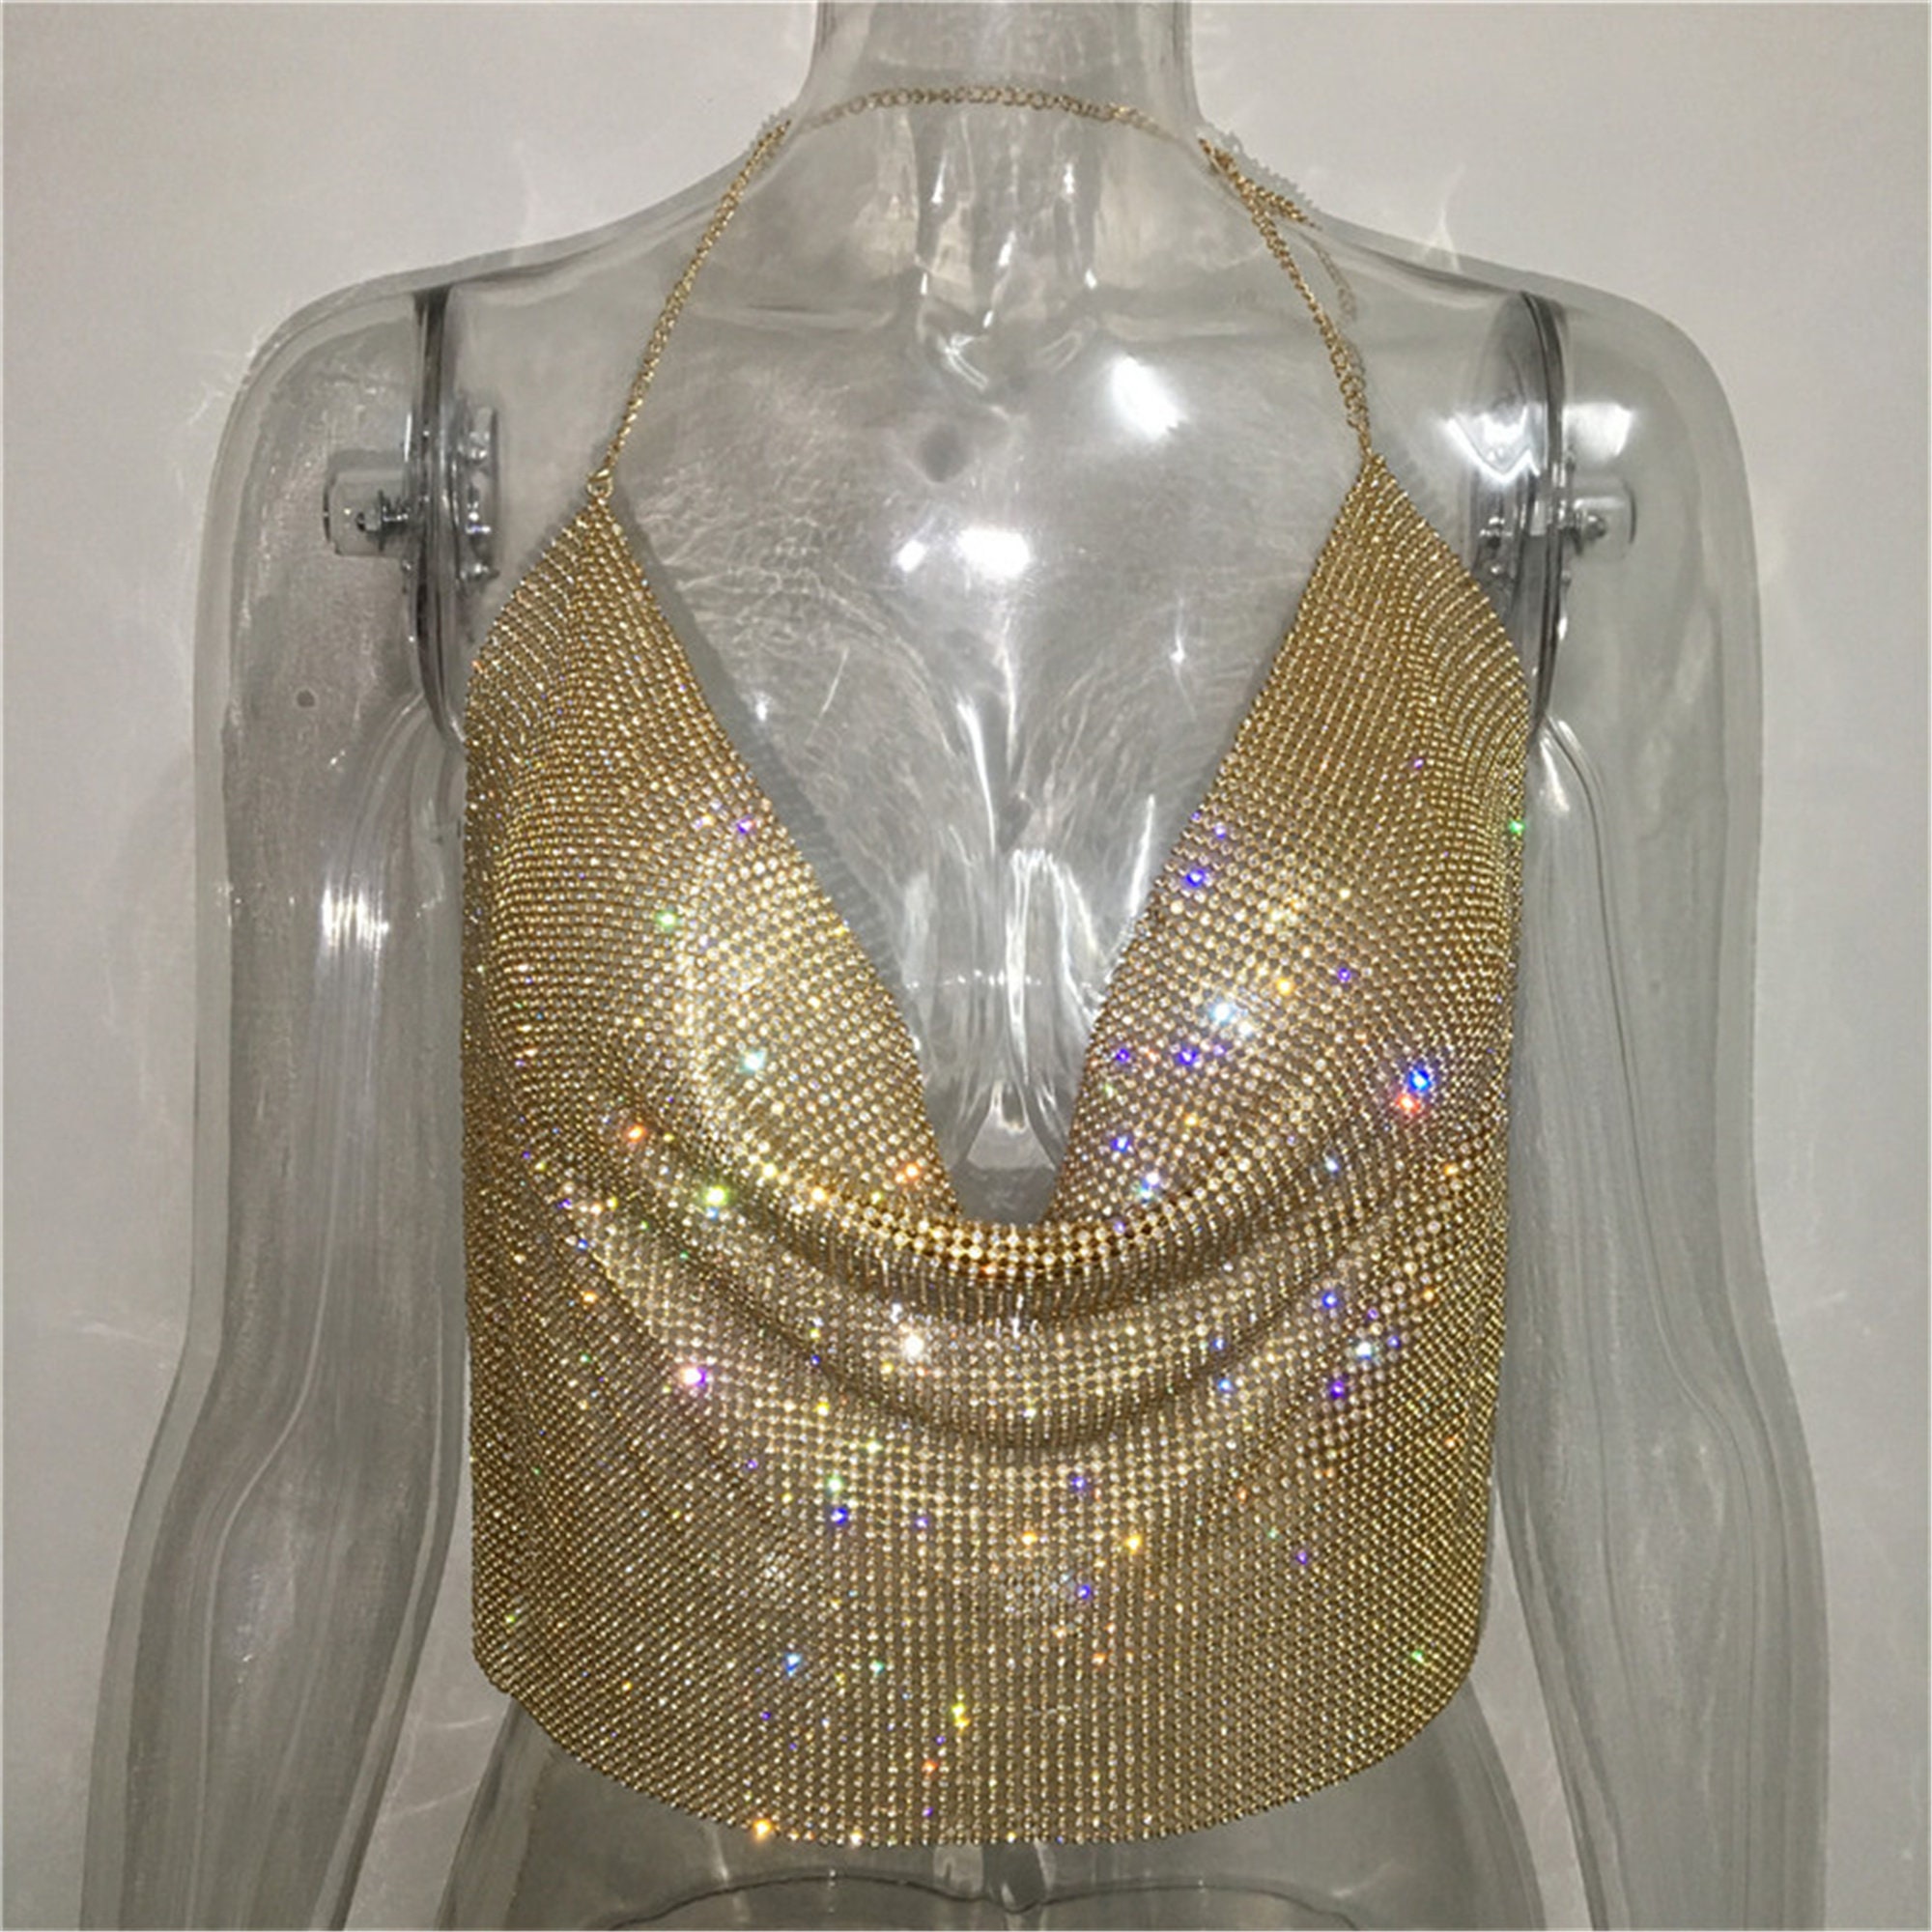 Rhinestone Backless Party Crop Top Women Deep V Neck Metal Tank Tops Open Back Top Y2k Aesthetic Cami Tube Womens Y2k Cami Top Gift